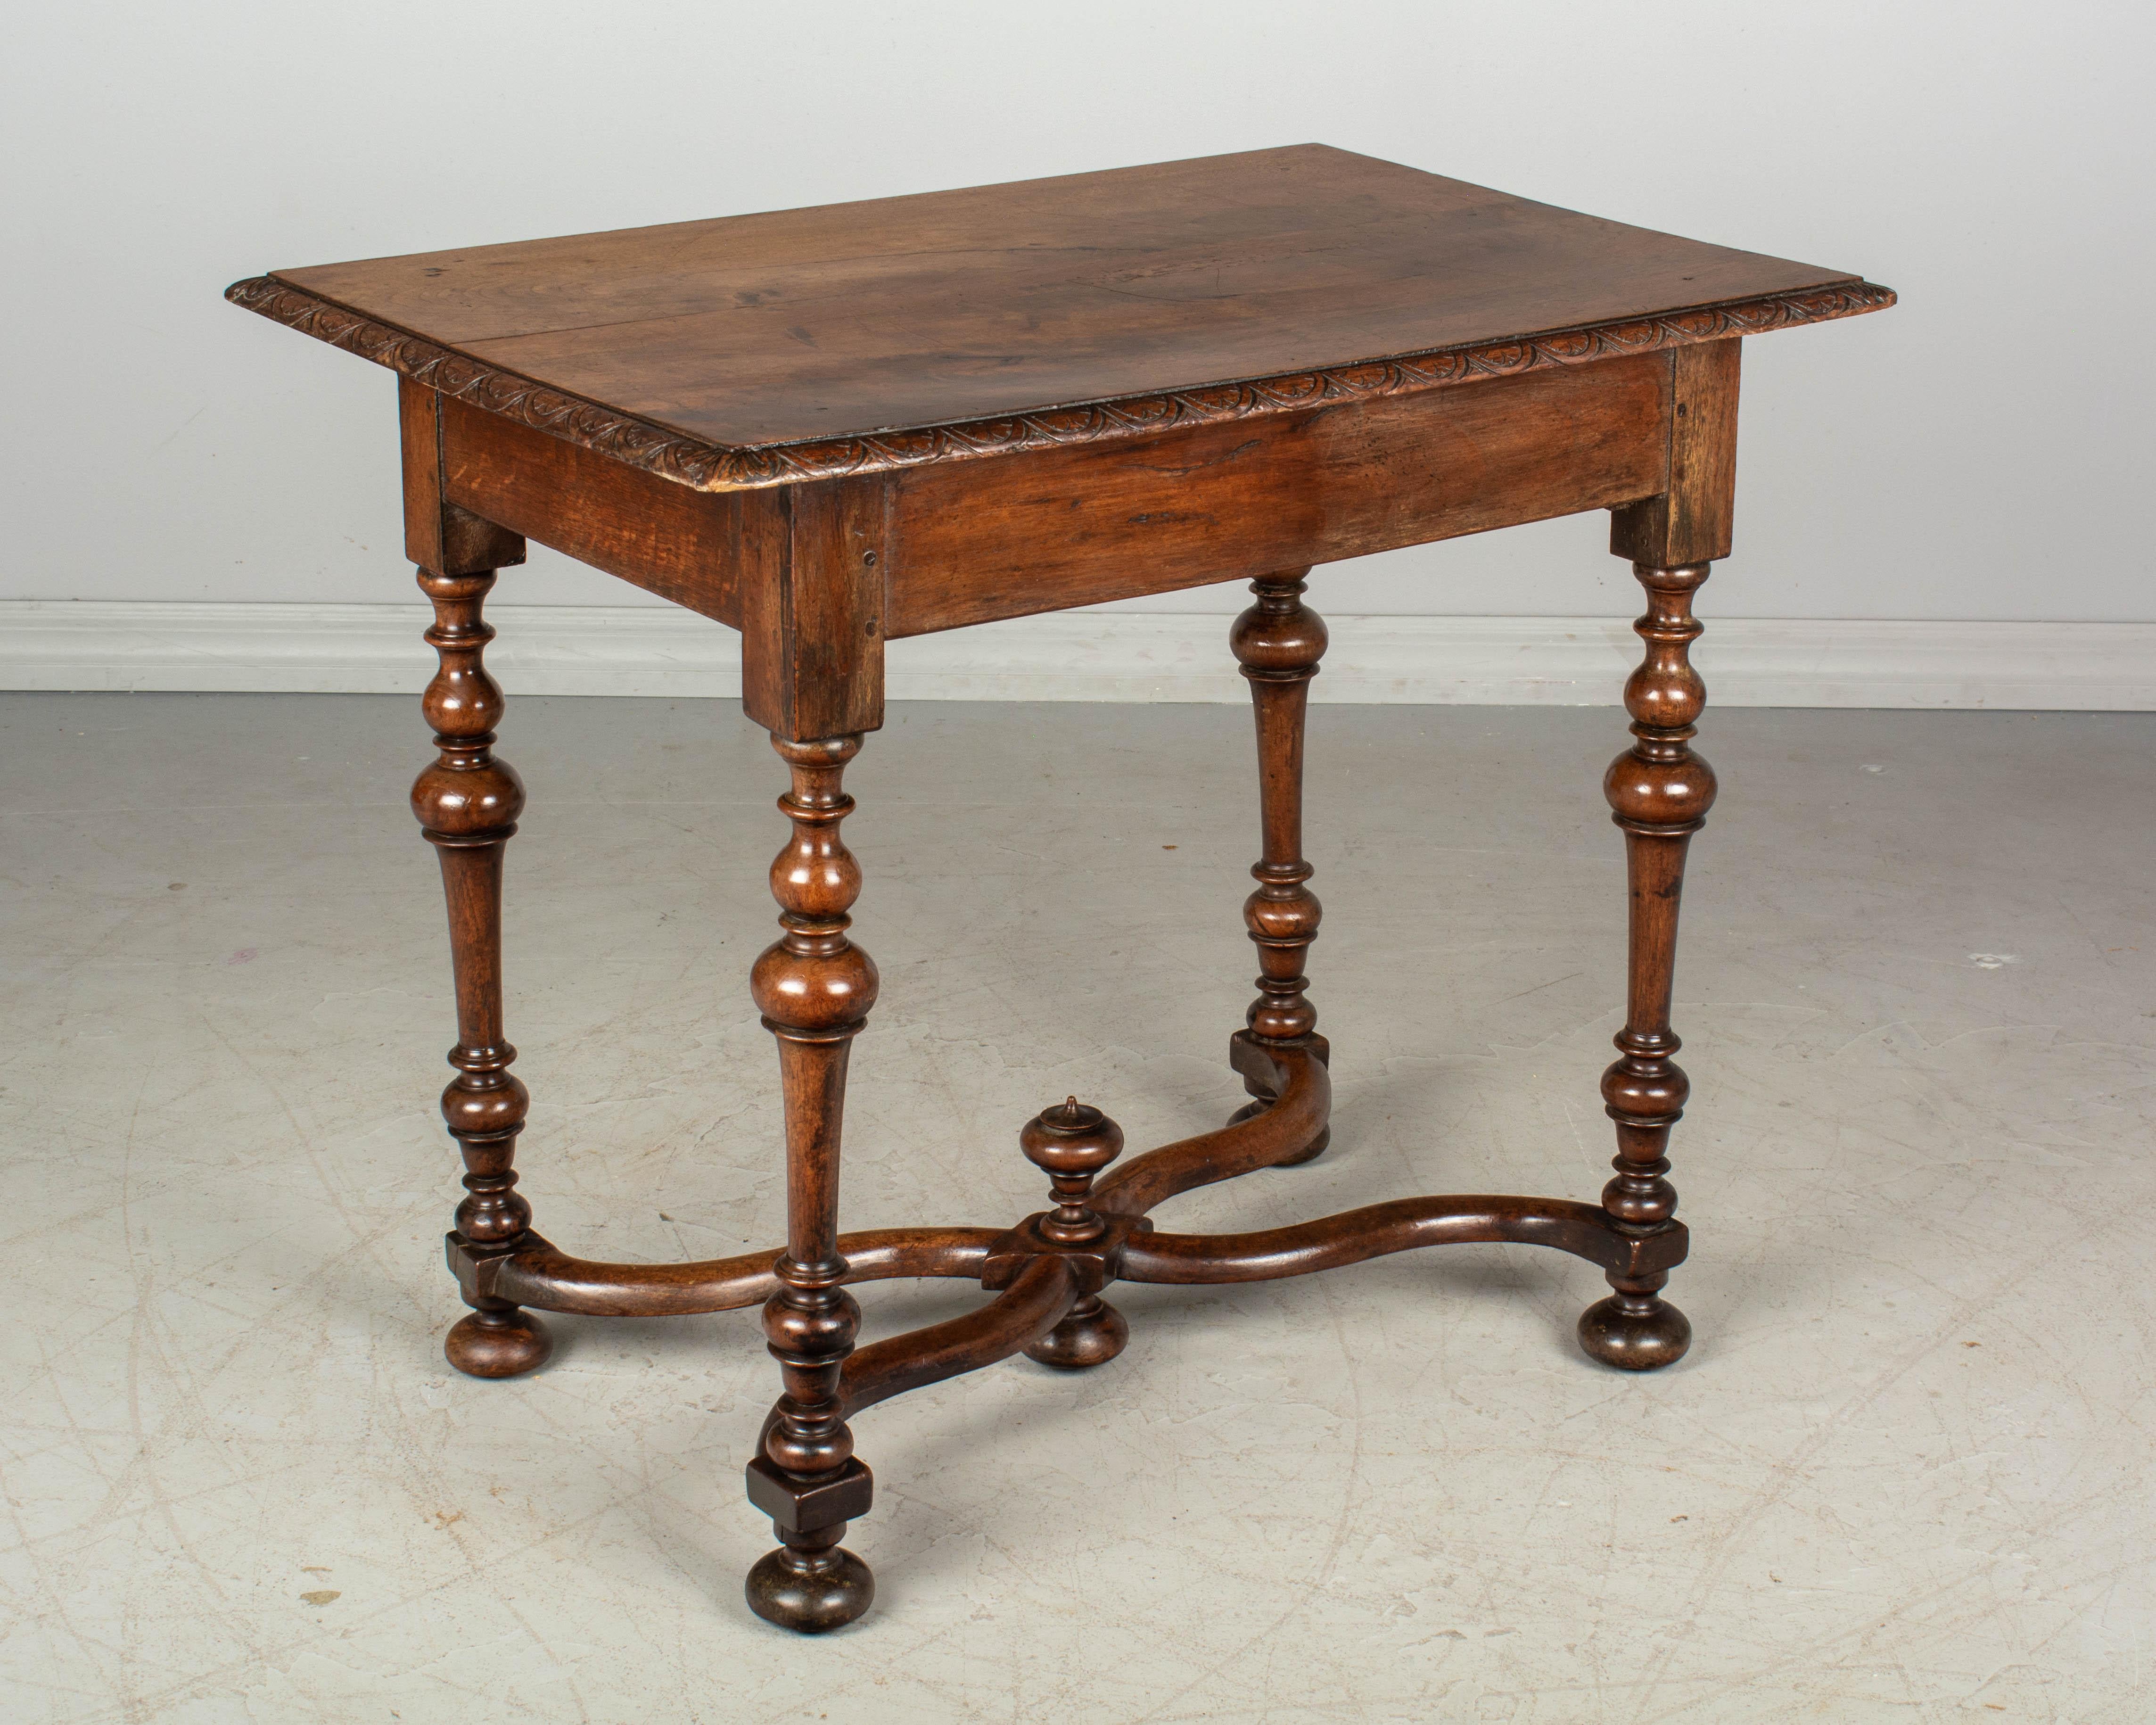 A 19th century Louis XIII style French side table made of solid walnut with a large dovetailed drawer. Fine turned legs and X-form stretcher with center finial. Pegged construction. Waxed patina. All original. This type of table was used as a